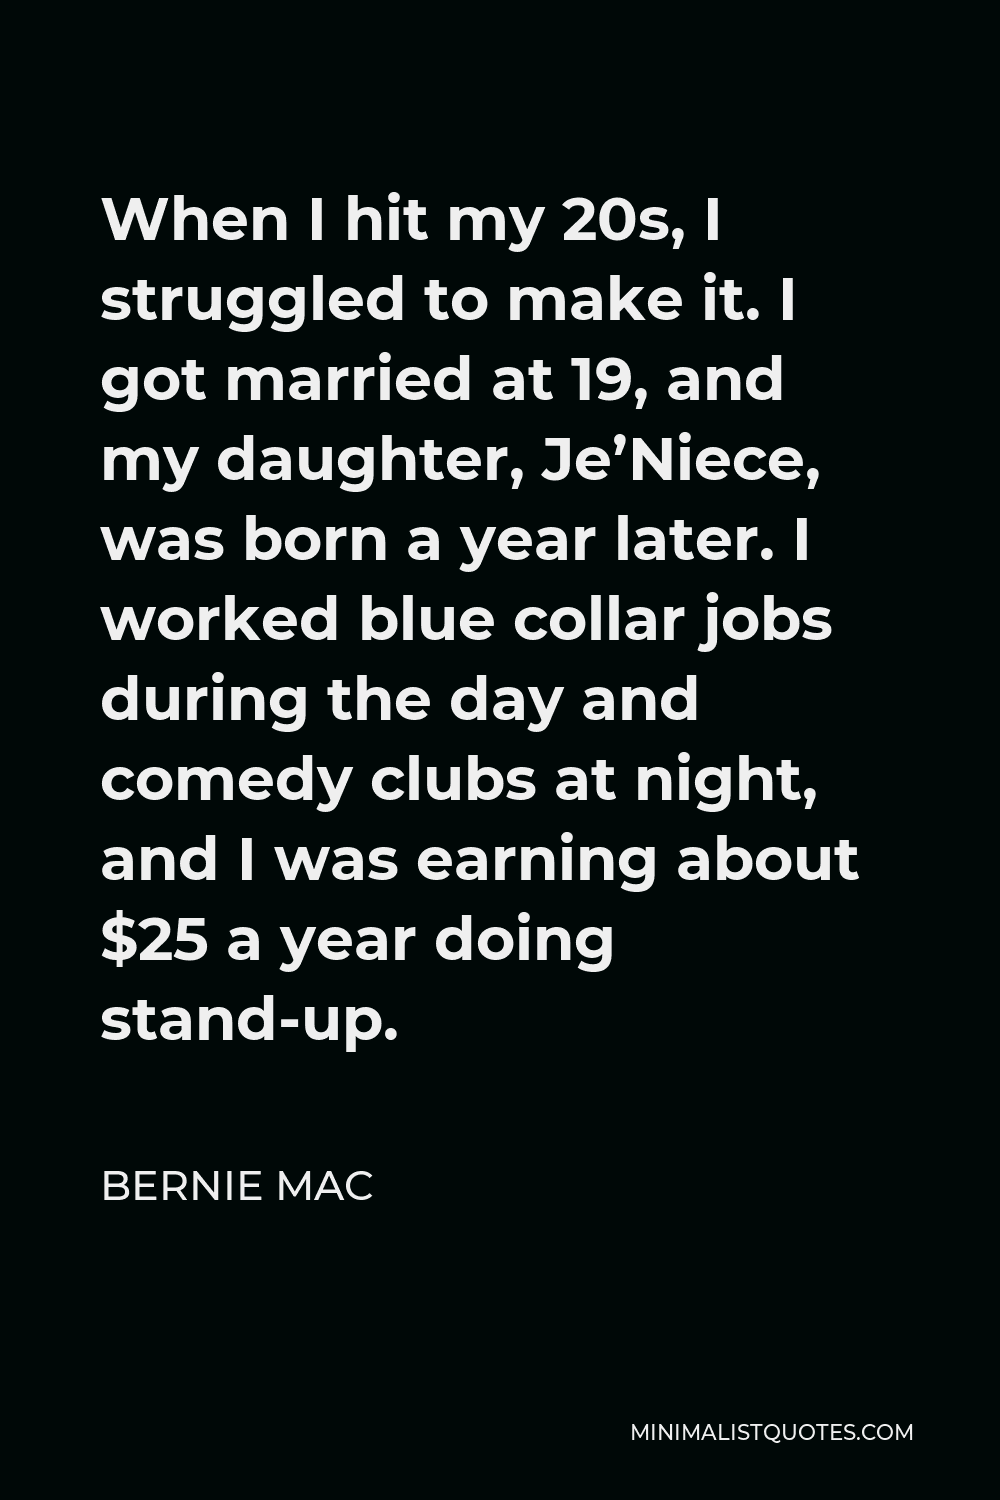 Bernie Mac Quote - When I hit my 20s, I struggled to make it. I got married at 19, and my daughter, Je’Niece, was born a year later. I worked blue collar jobs during the day and comedy clubs at night, and I was earning about $25 a year doing stand-up.